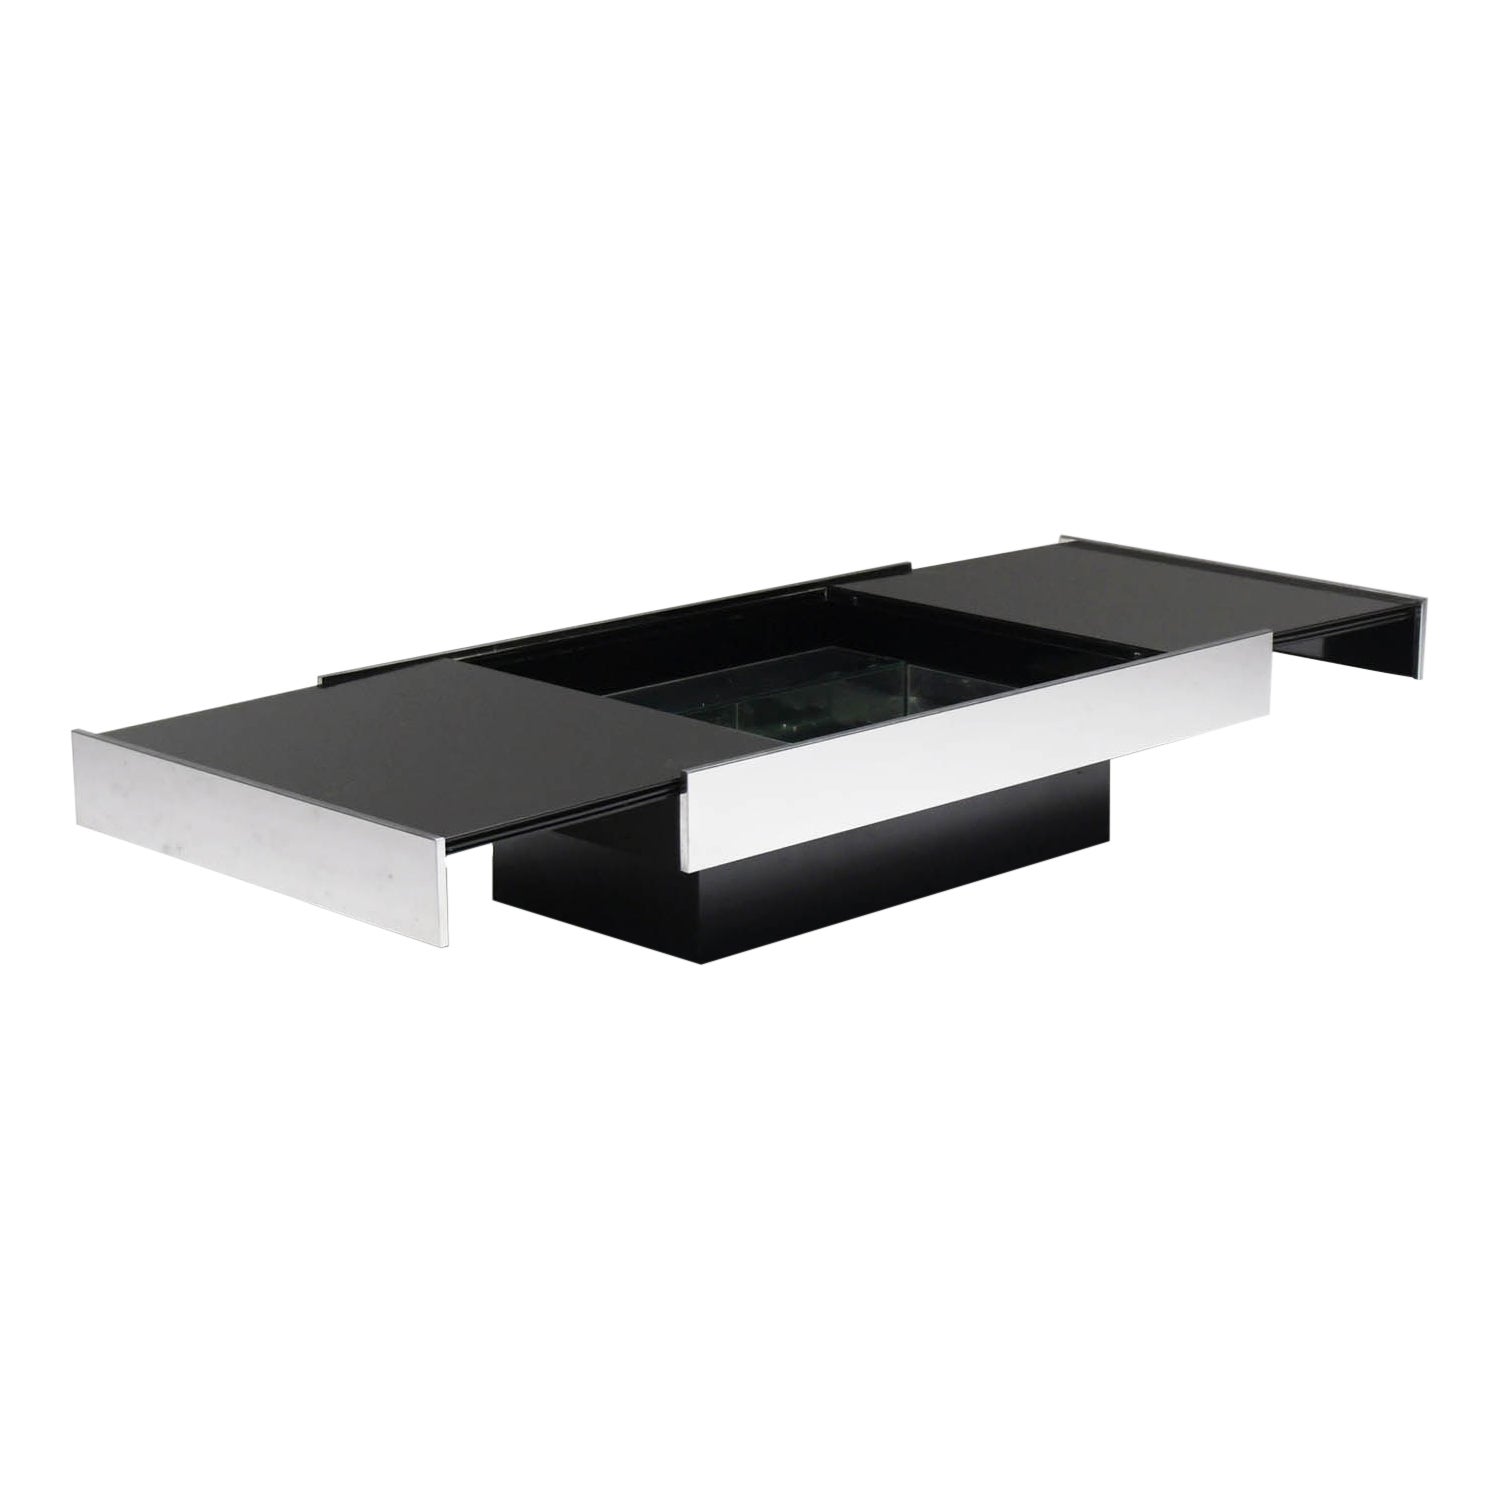 Mirrored extendable coffee table with hidden bar  by Willy Rizzo for Cidue Italy